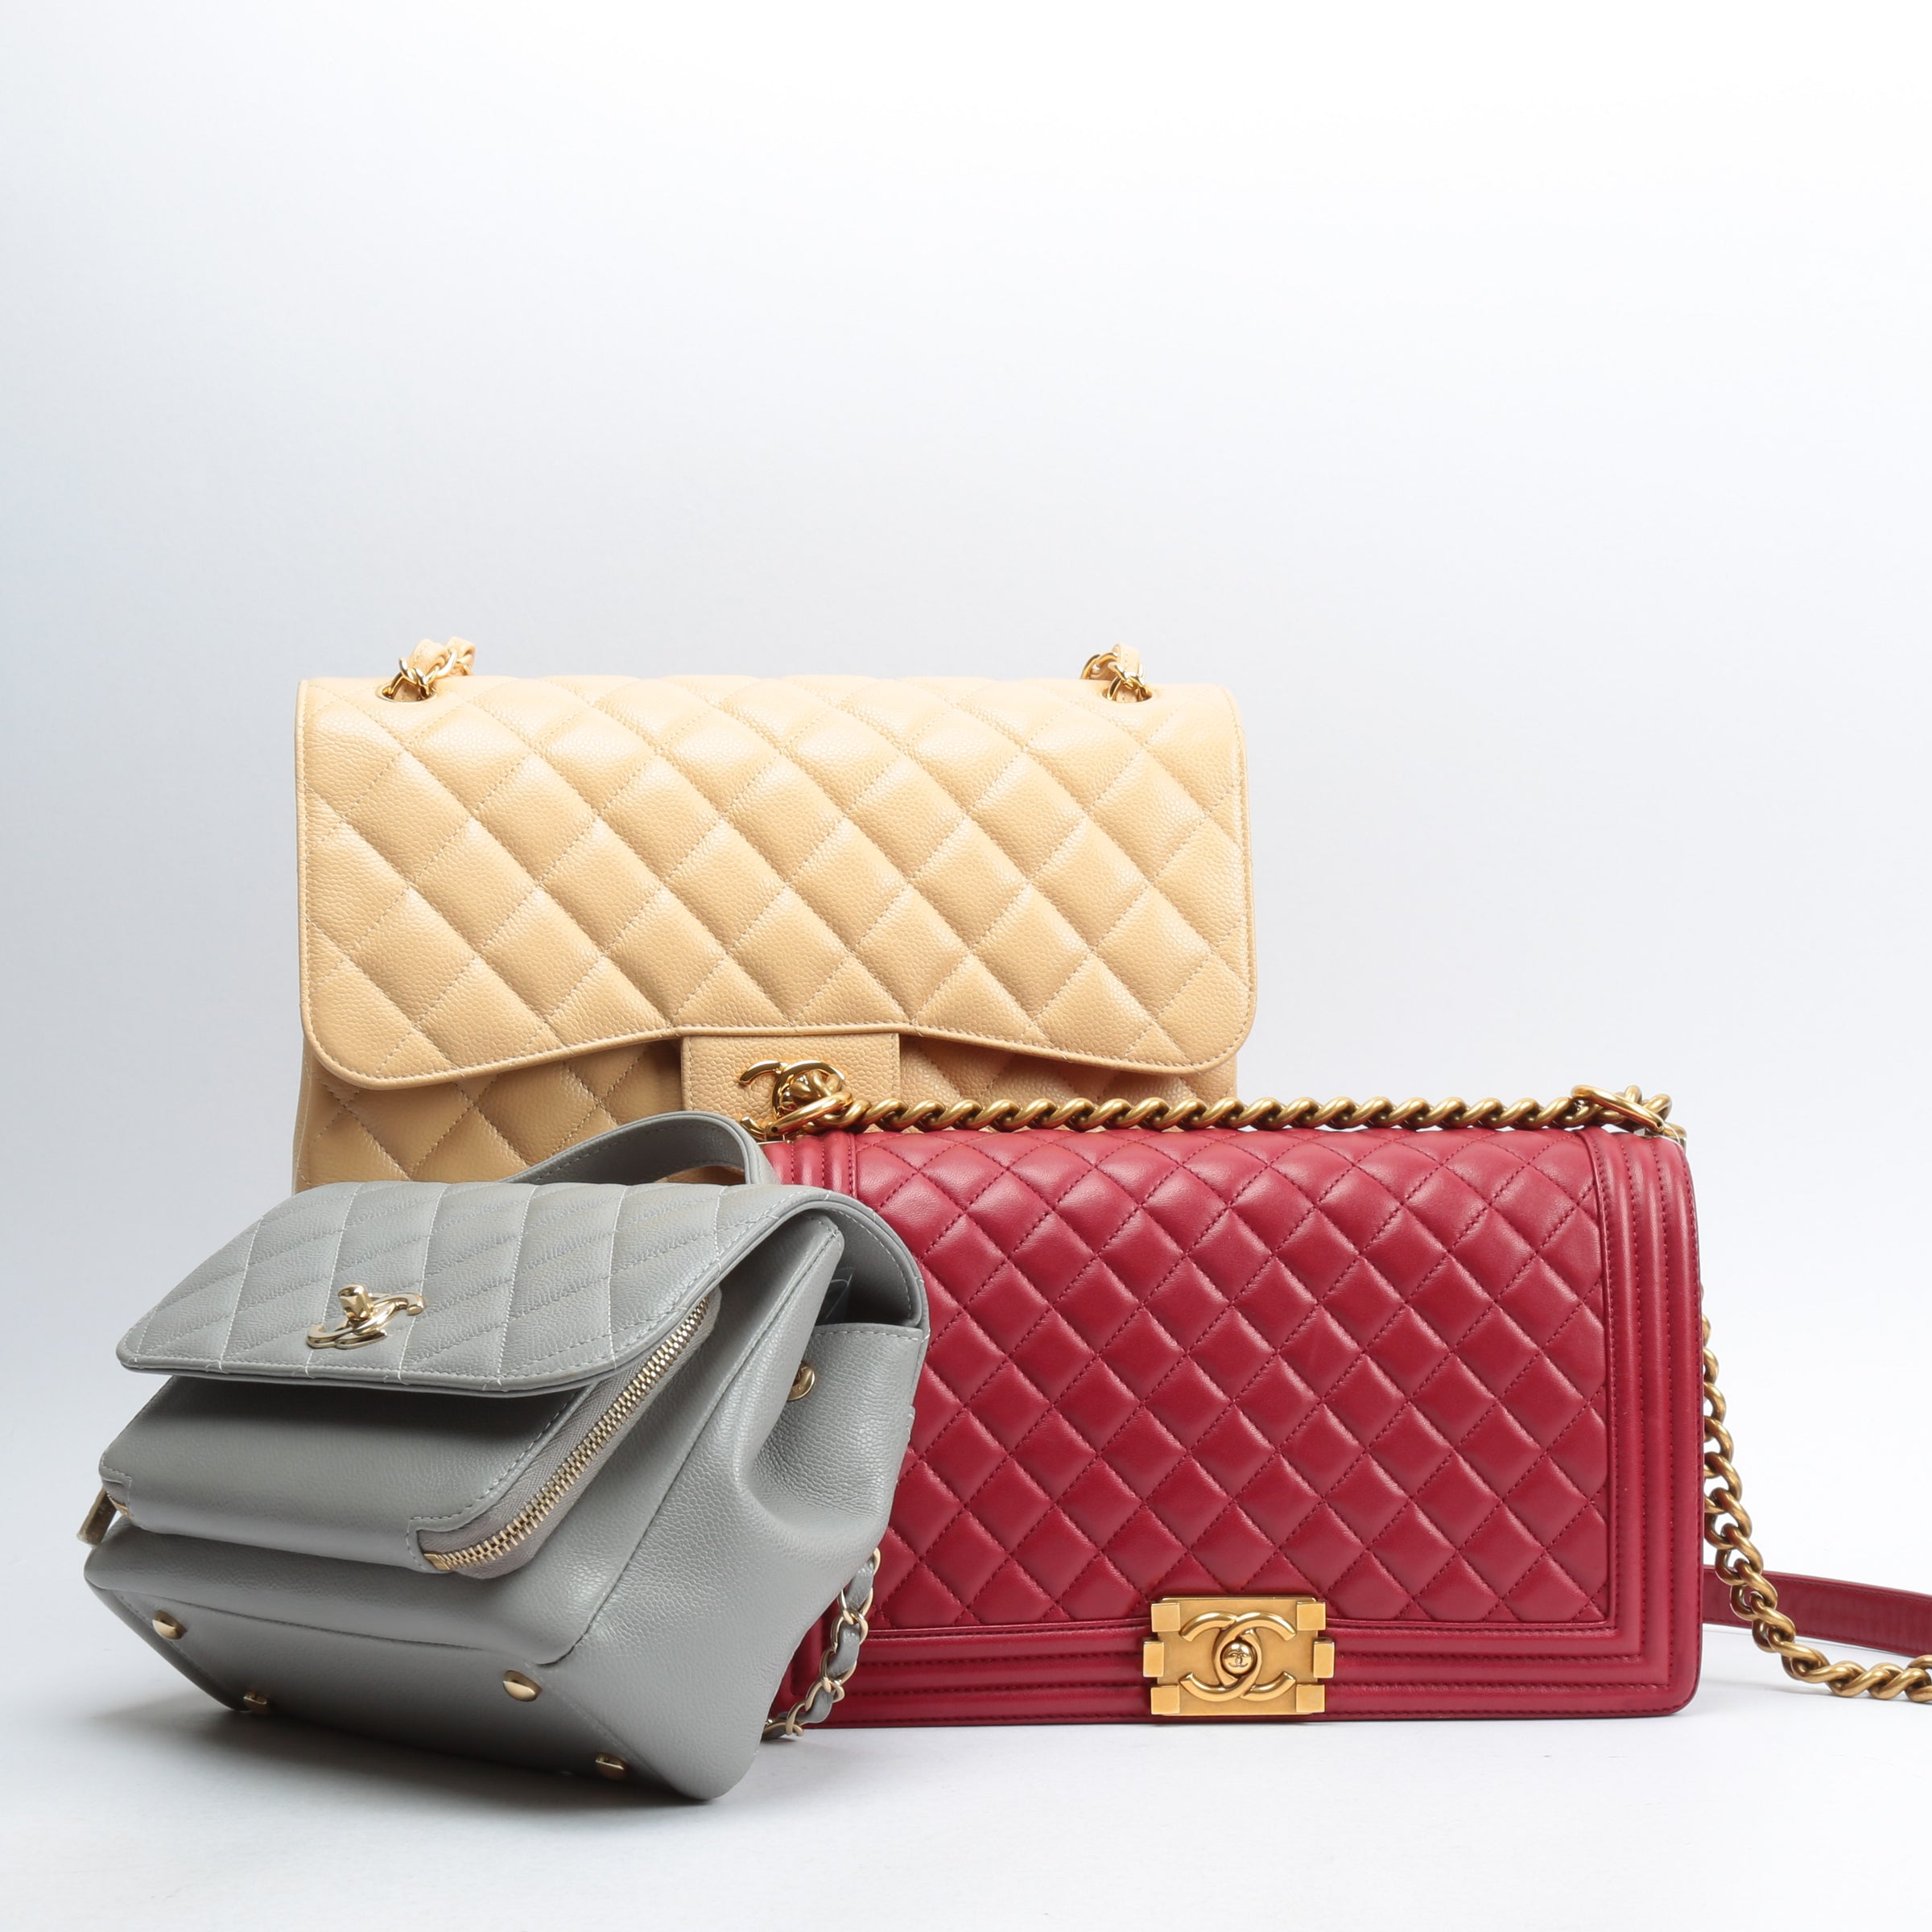 Sell us your gently used designer handbags and wallets for cash on